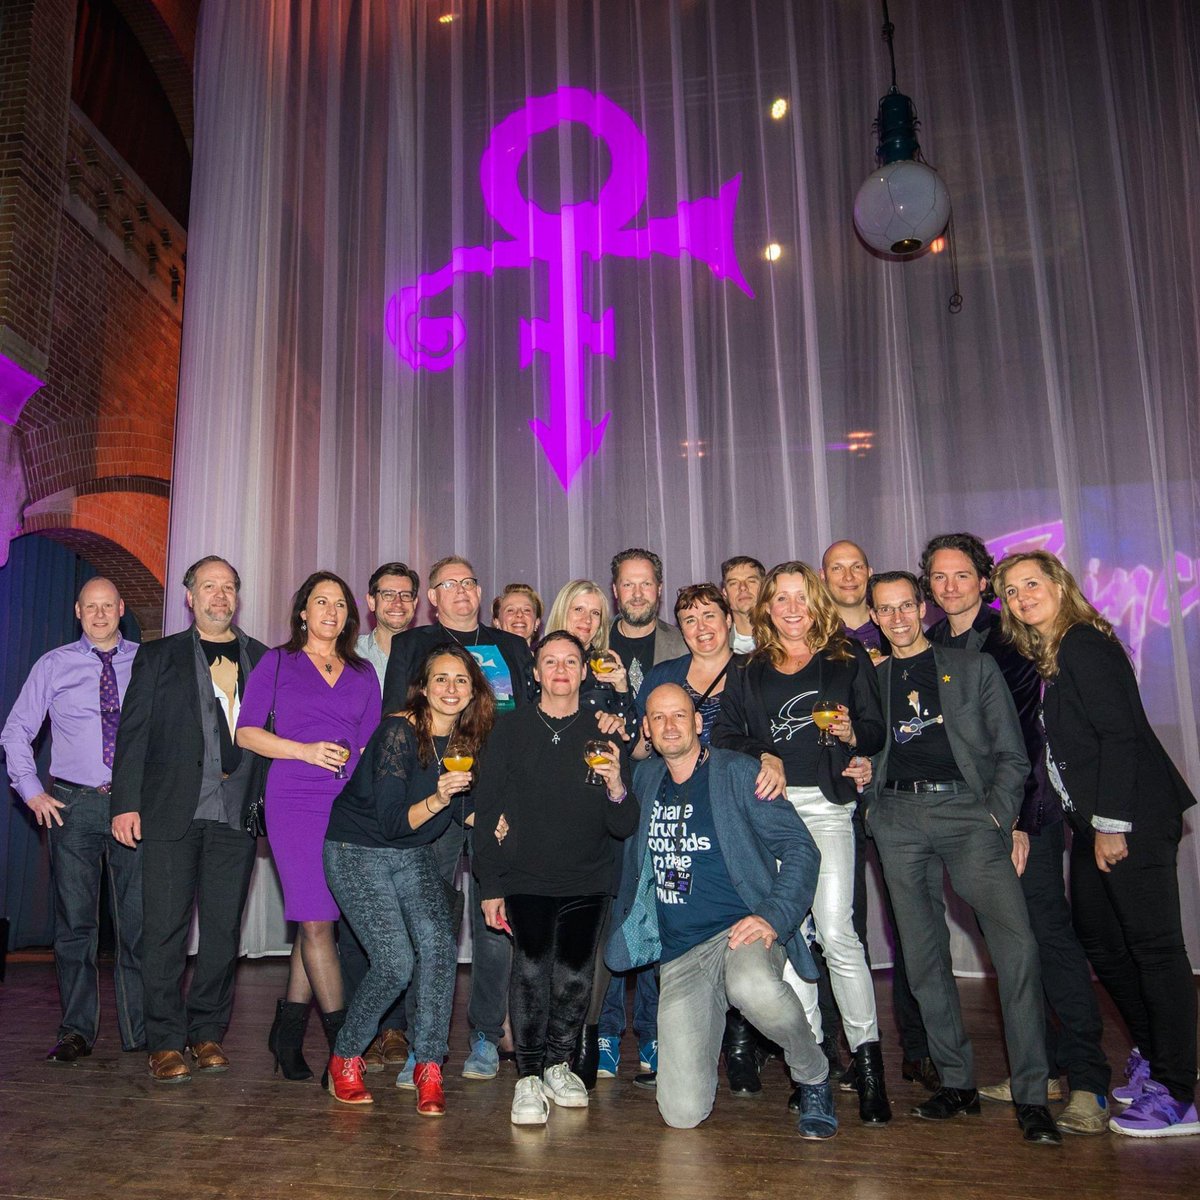 3 years ago opening of the #prince exhibition in @BeursVanBerlage #purplearmy #PRINCE4EVER @Mishell1972 @Cisko88 @Ecnirp1970